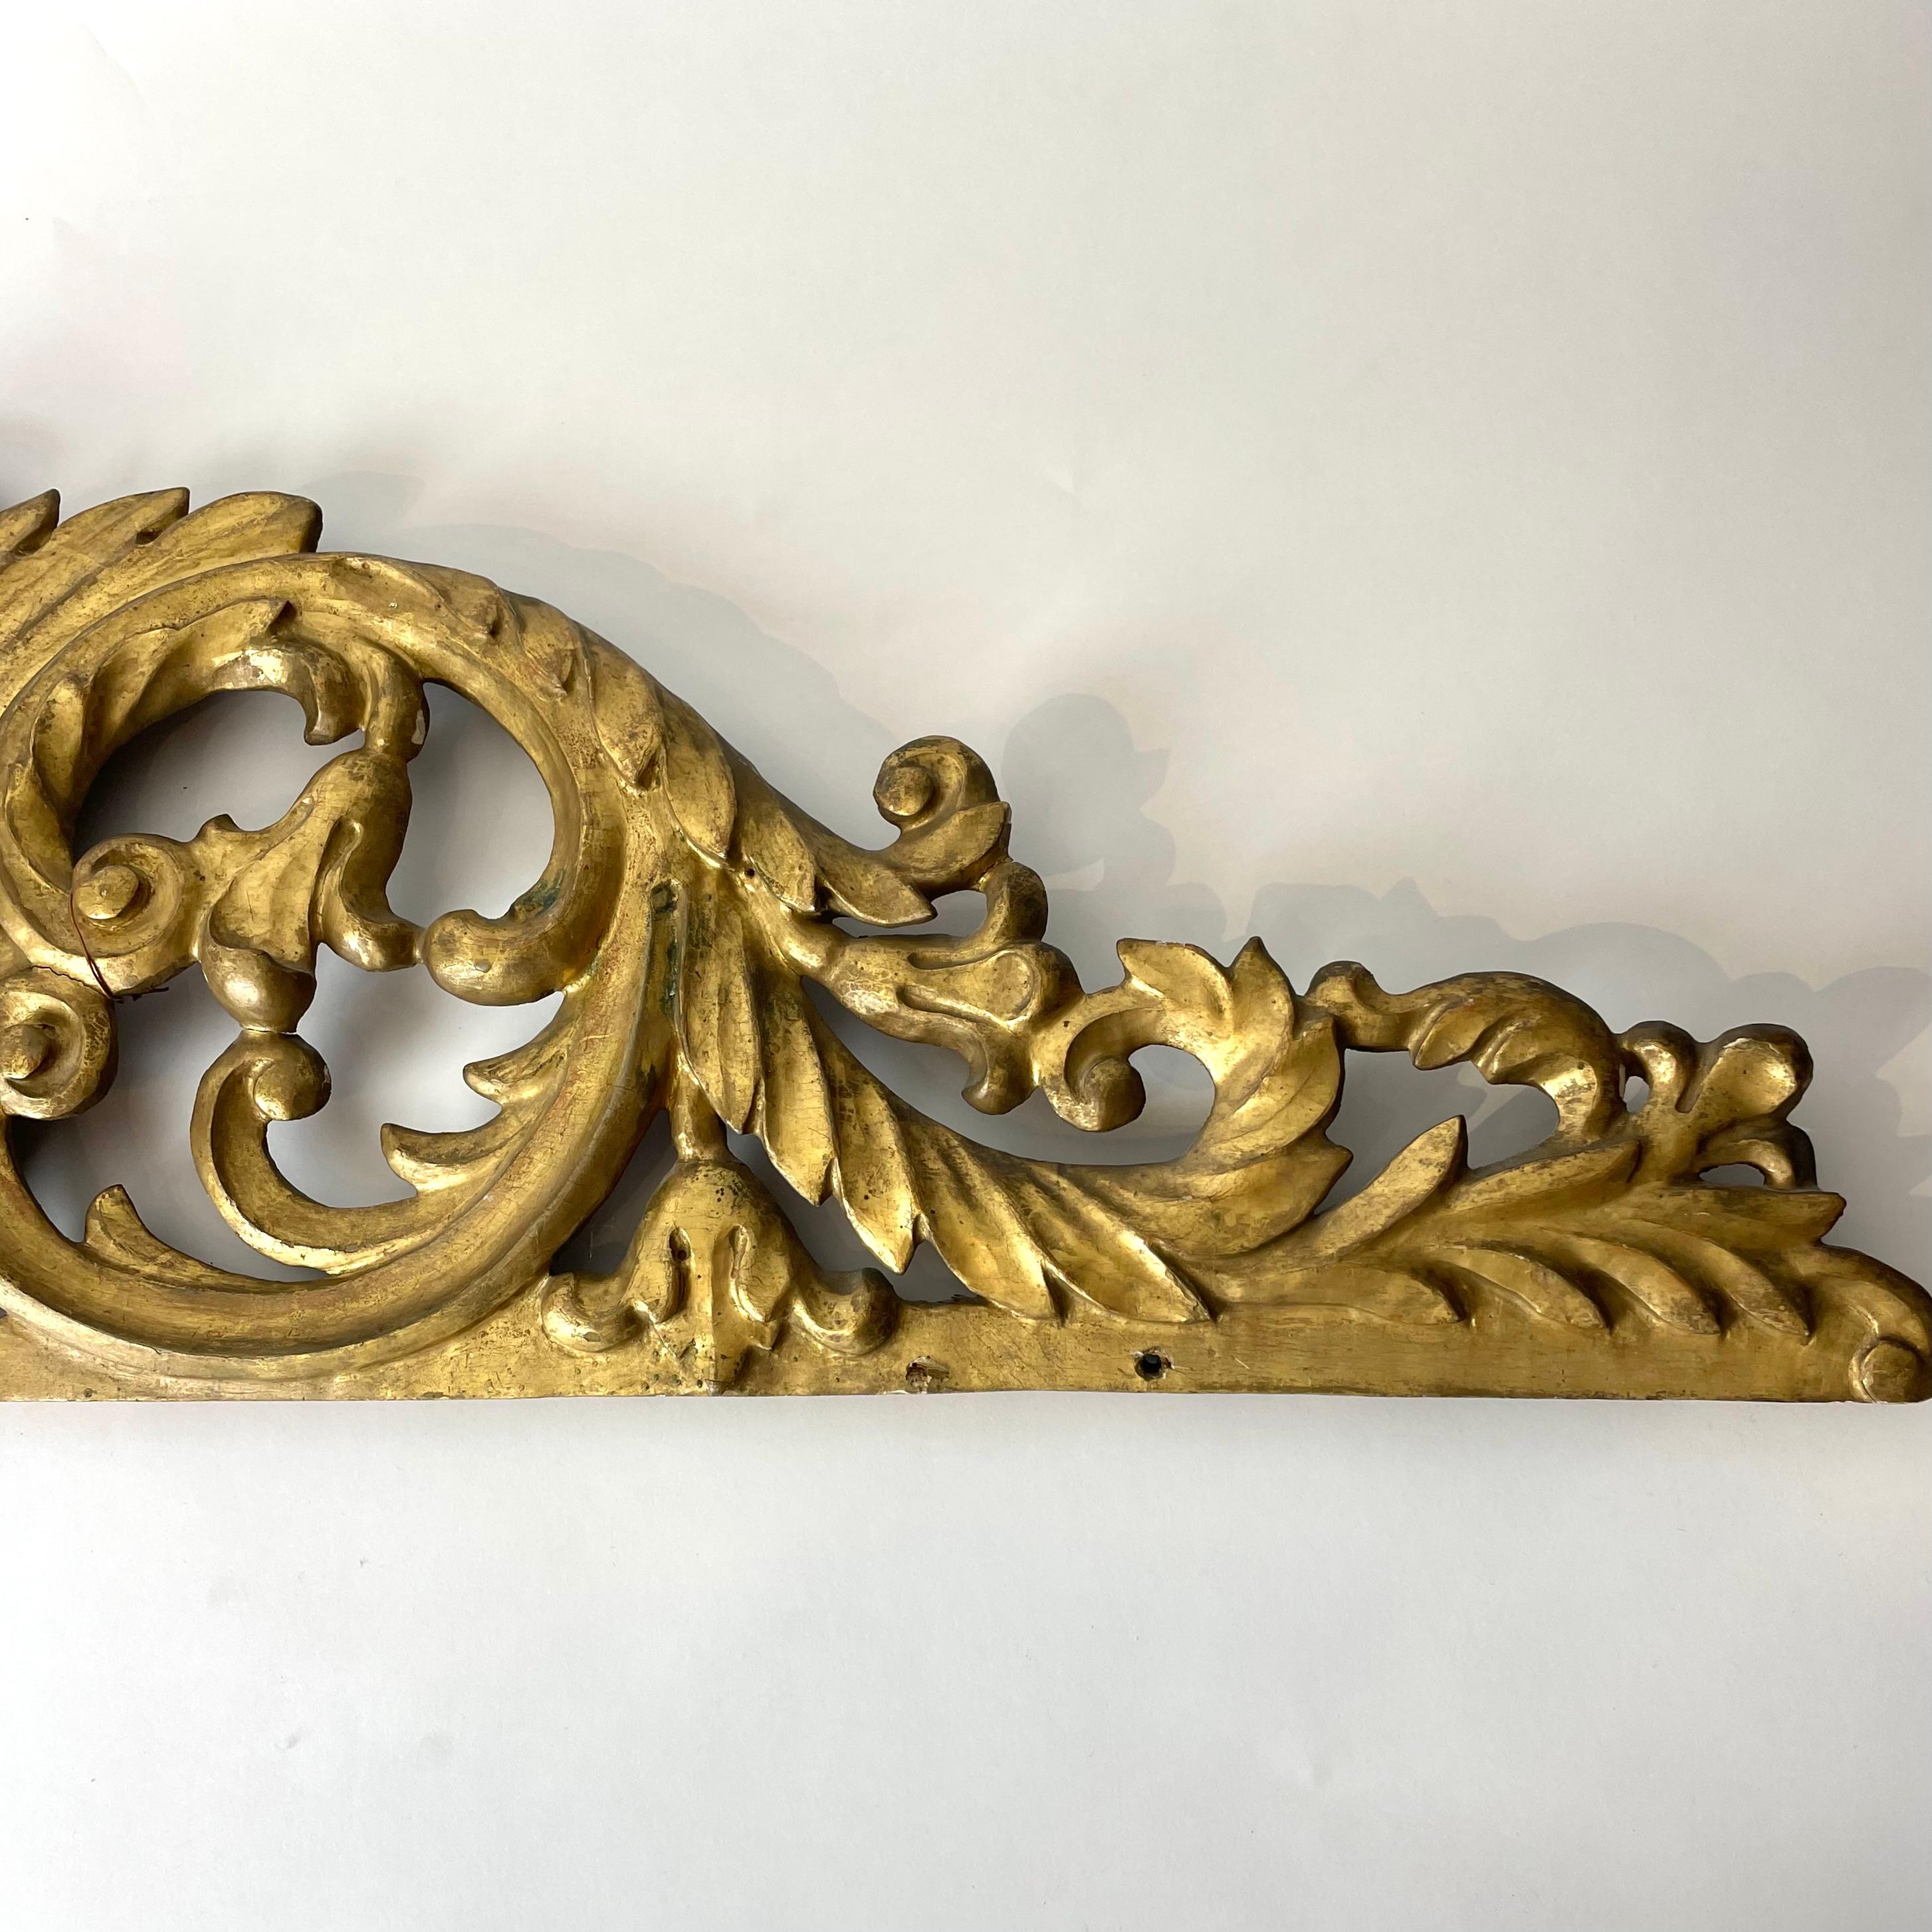 Rococo Decorative Door Moulding Architrave Gilt and Silvered Wood Panel, 18th Century For Sale